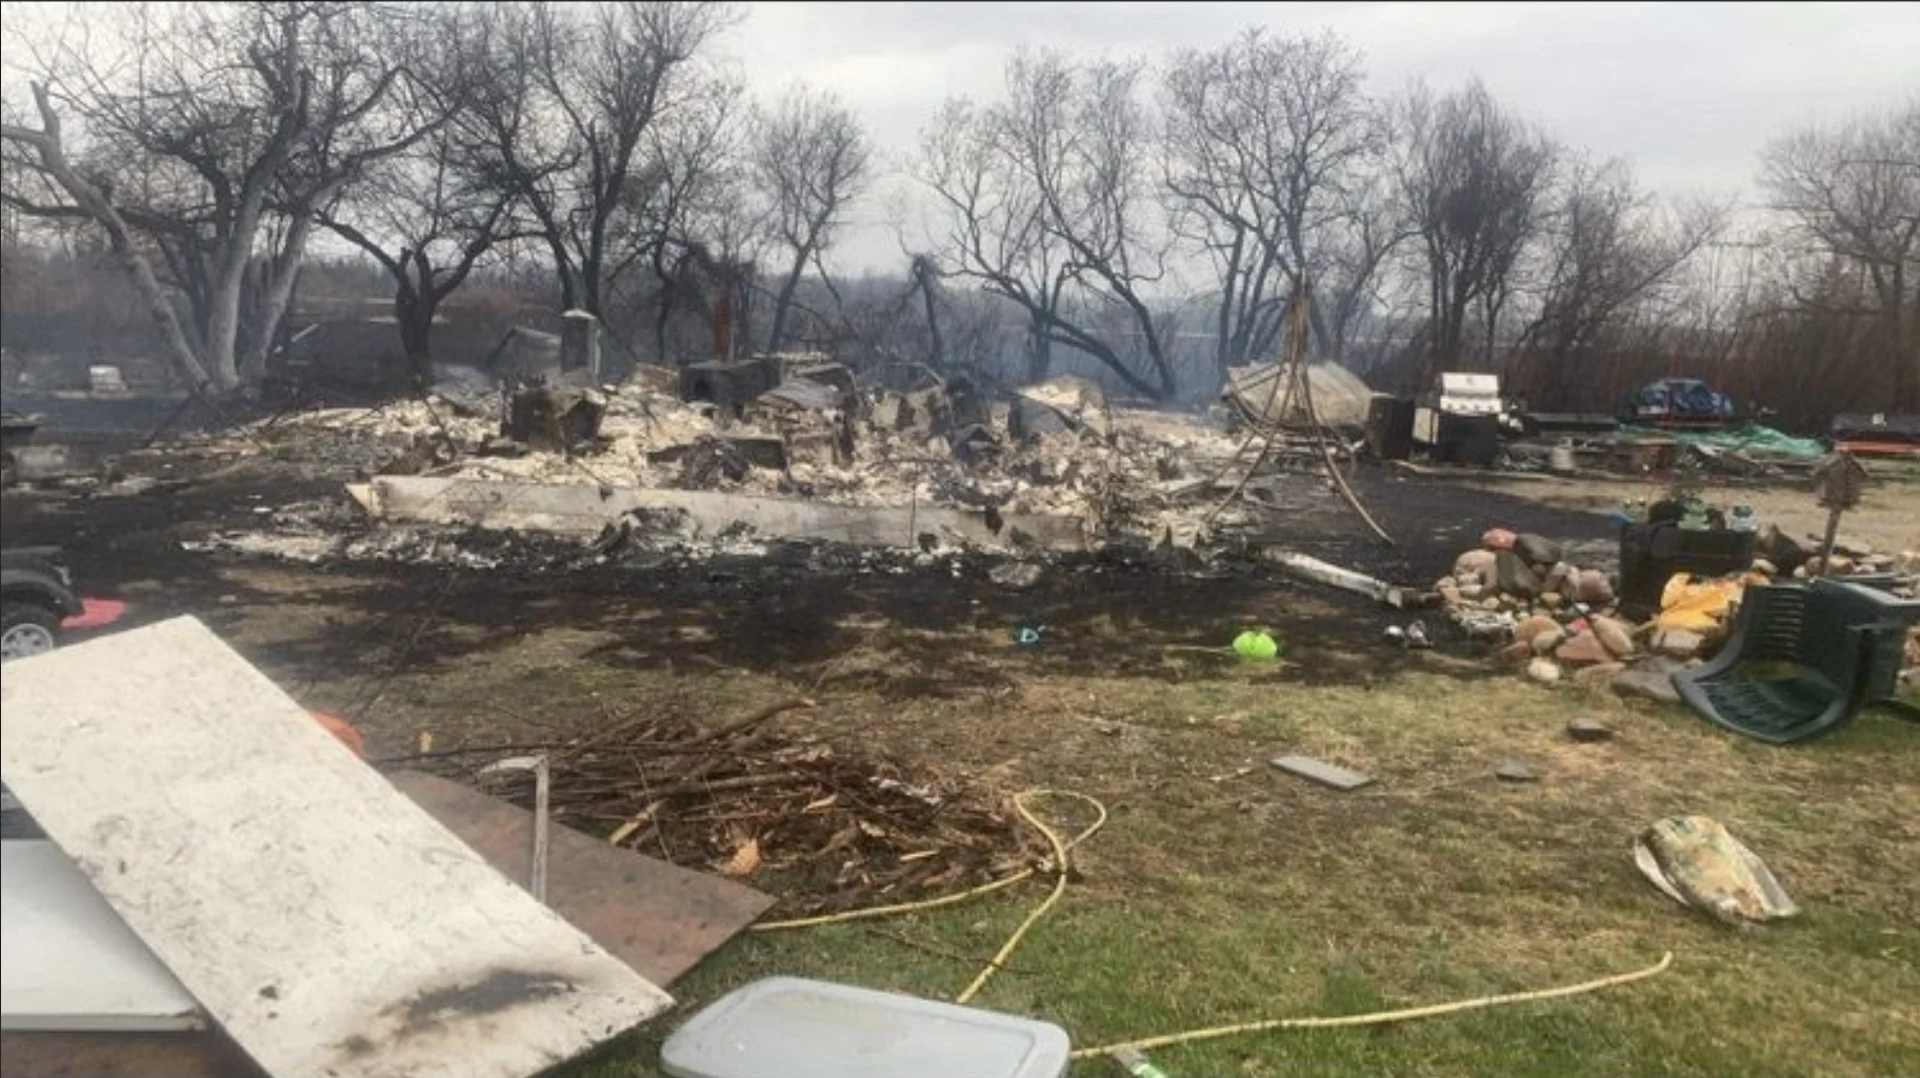 Albertan recalls harrowing encounter with wildfire that destroyed home